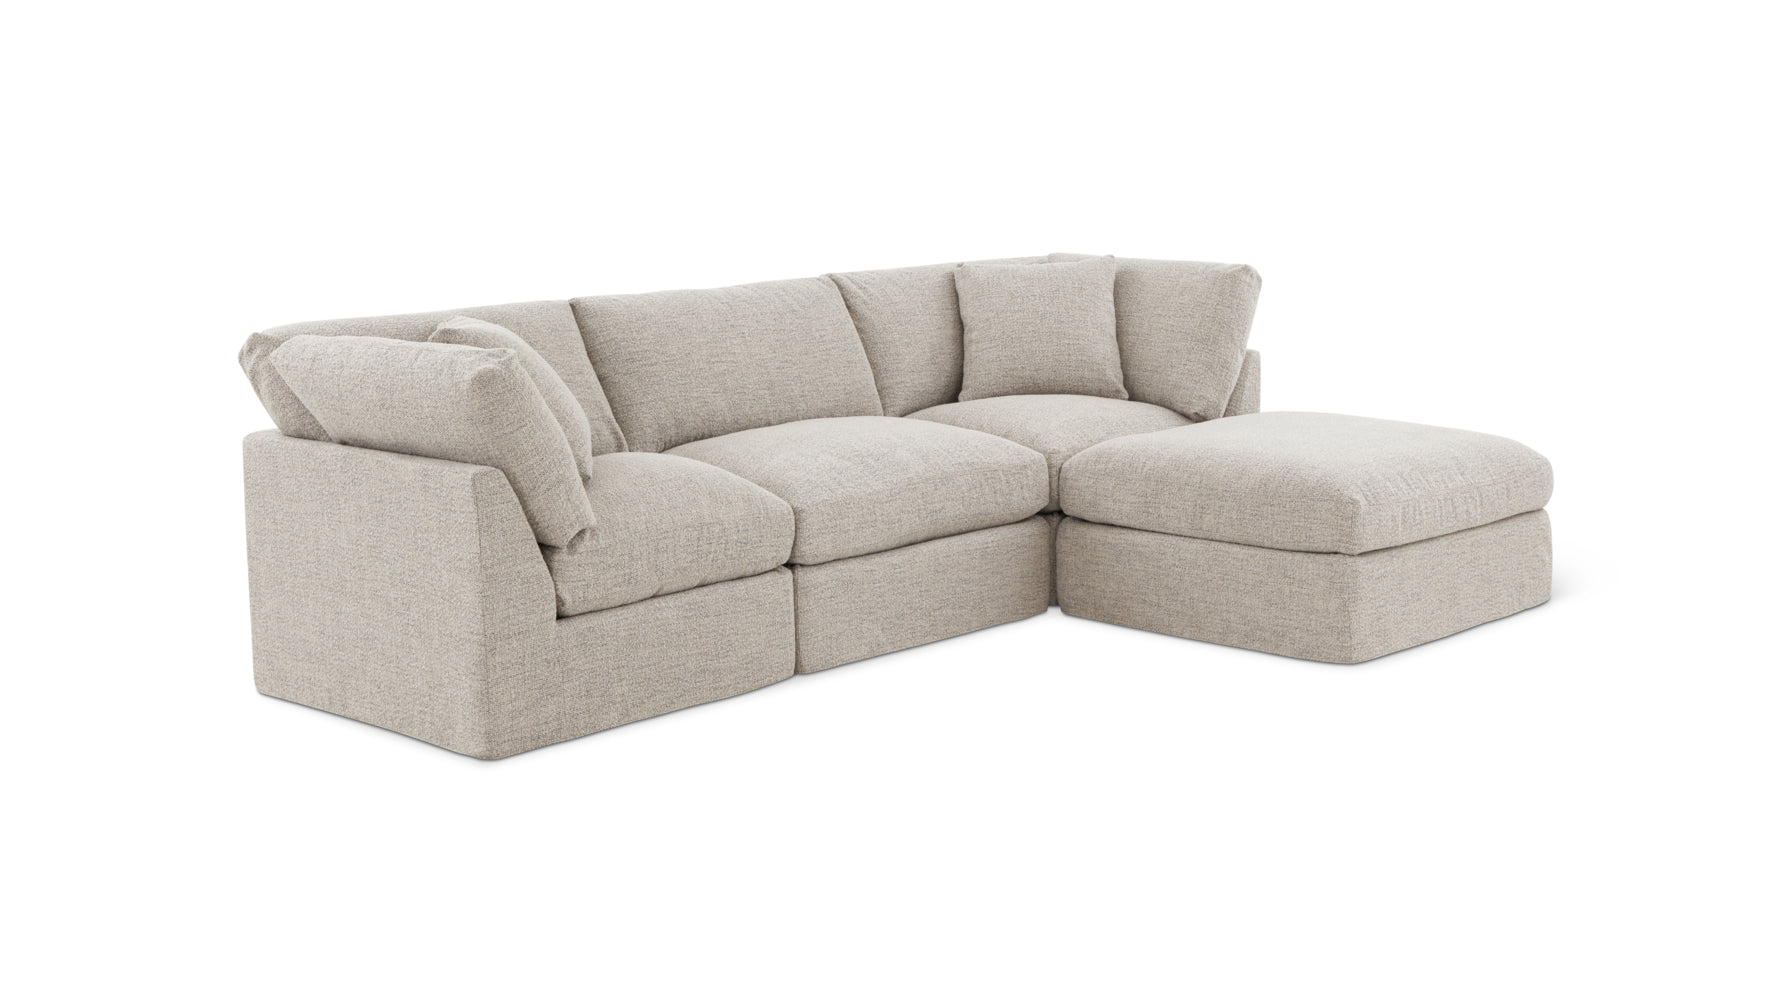 Get Together™ 4-Piece Modular Sectional, Standard, Oatmeal - Image 5